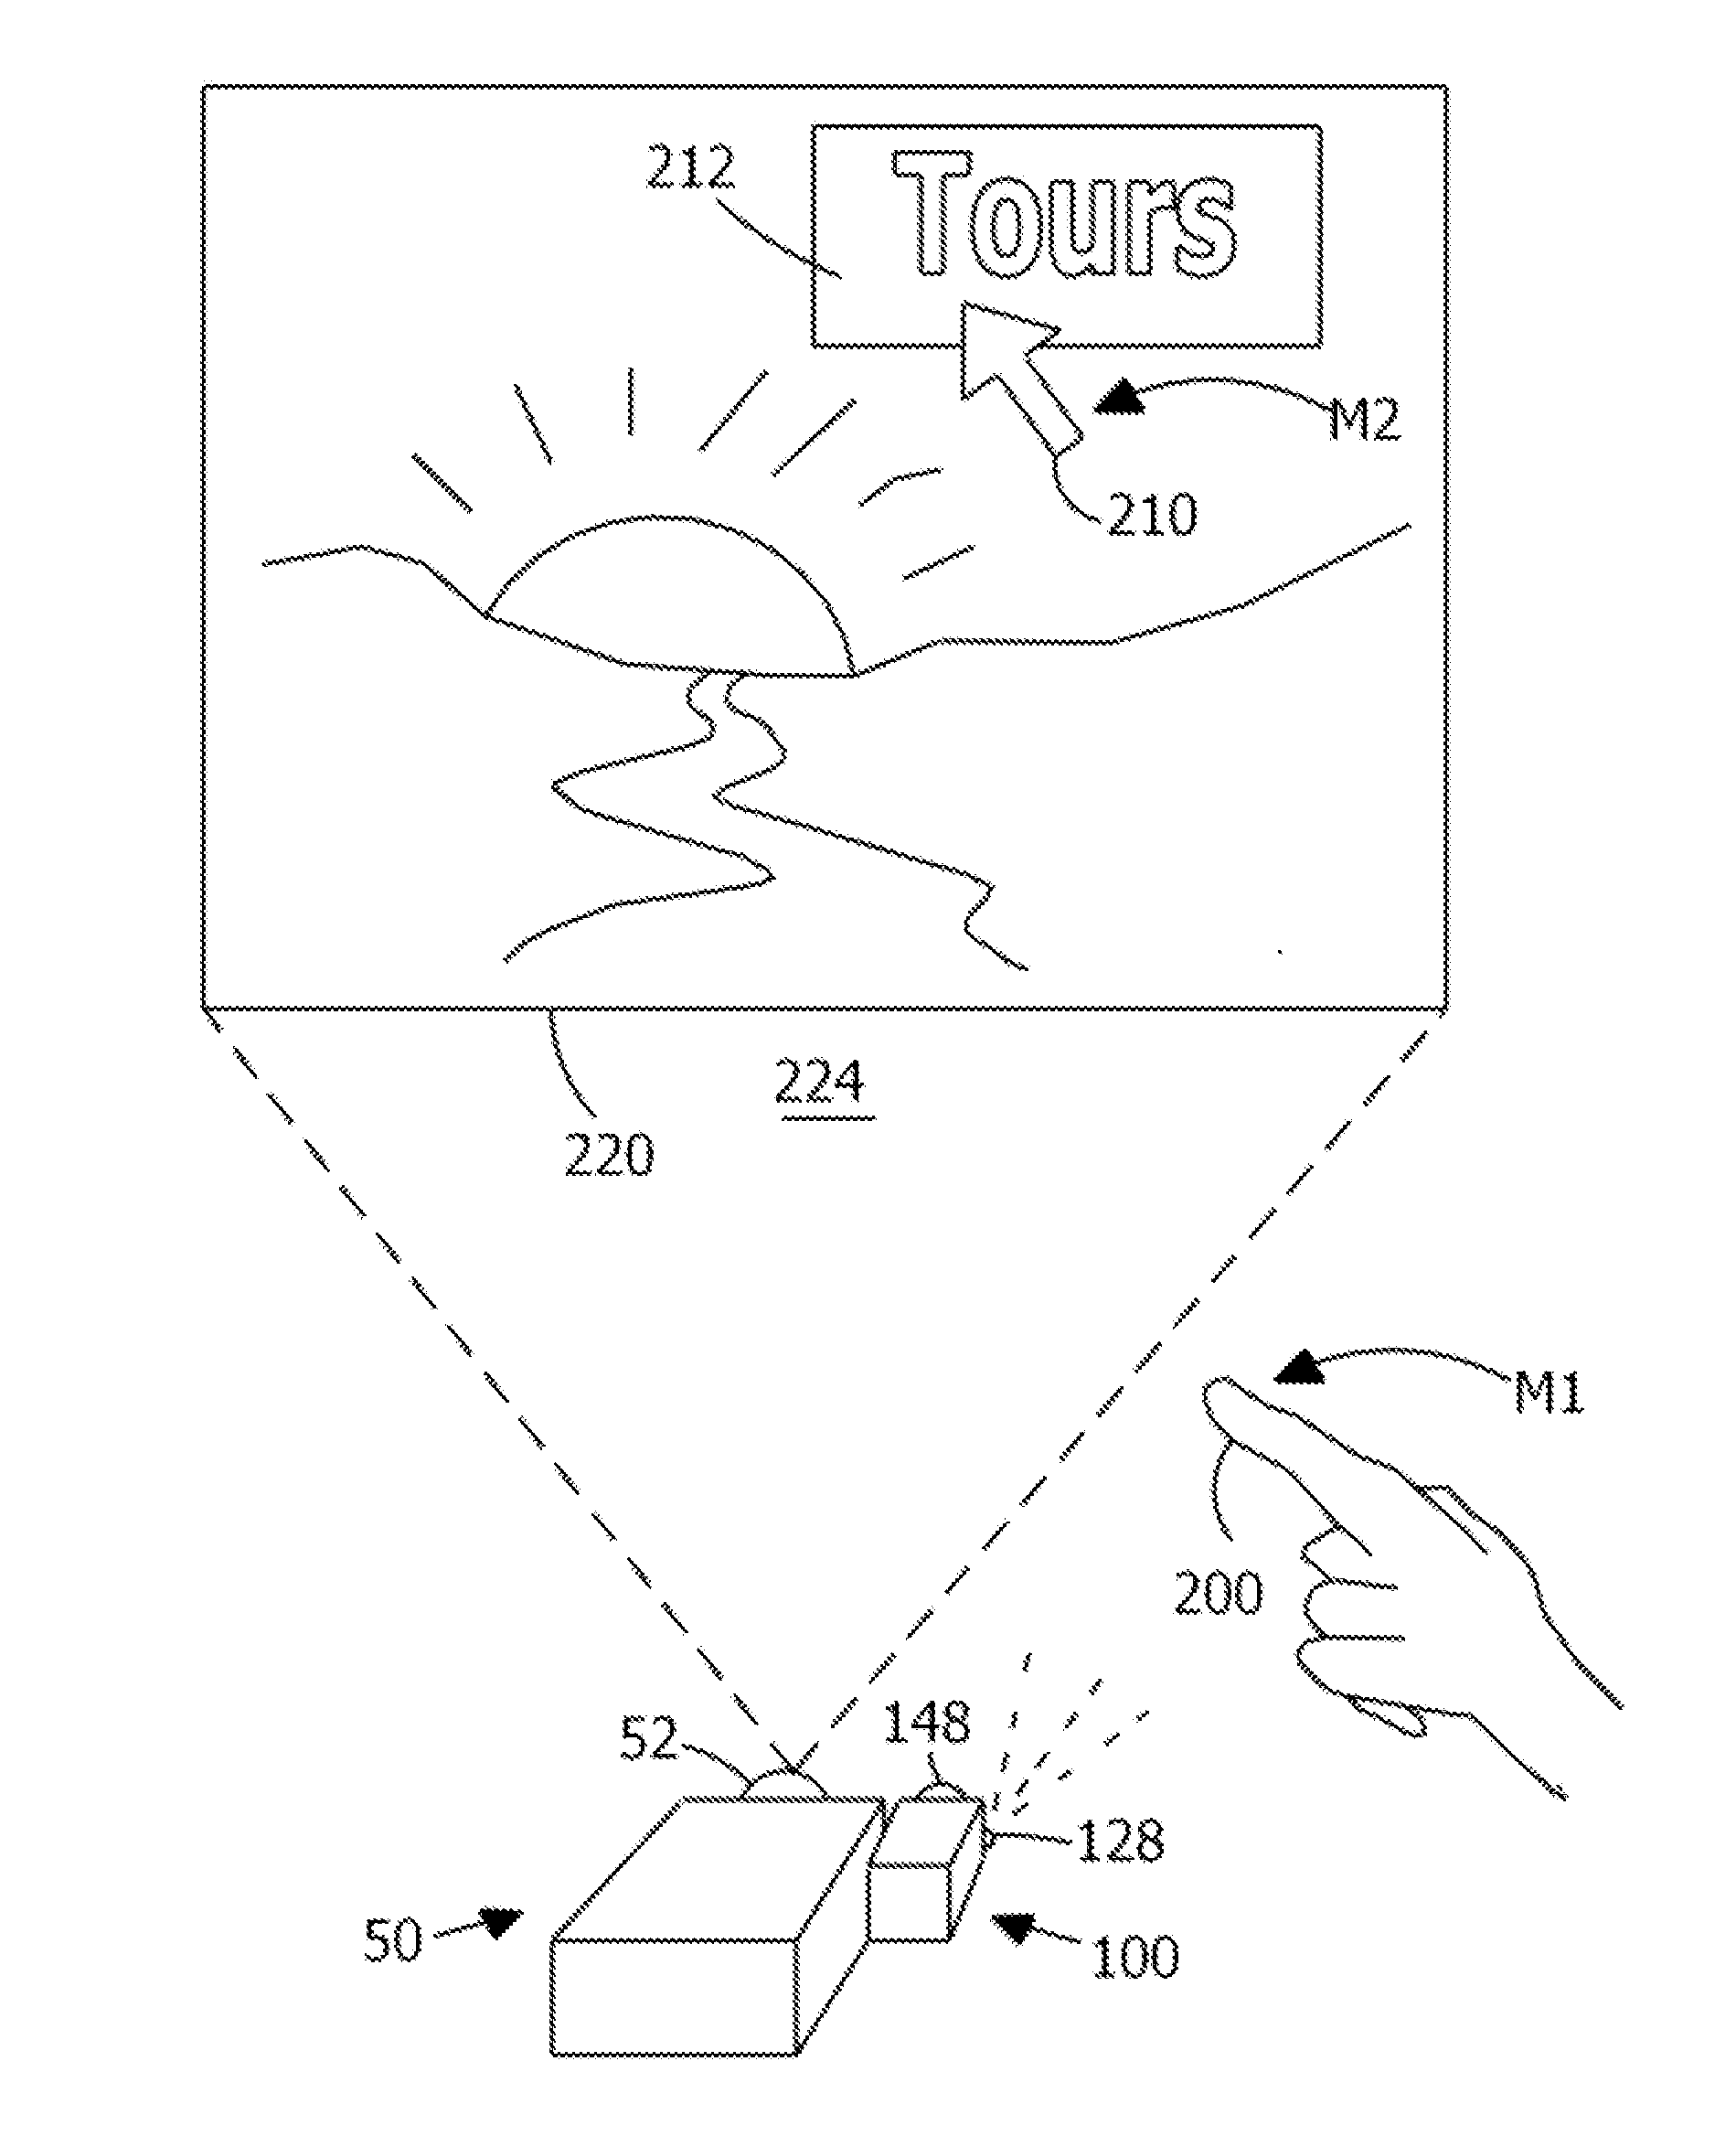 Spatially aware pointer for mobile appliances